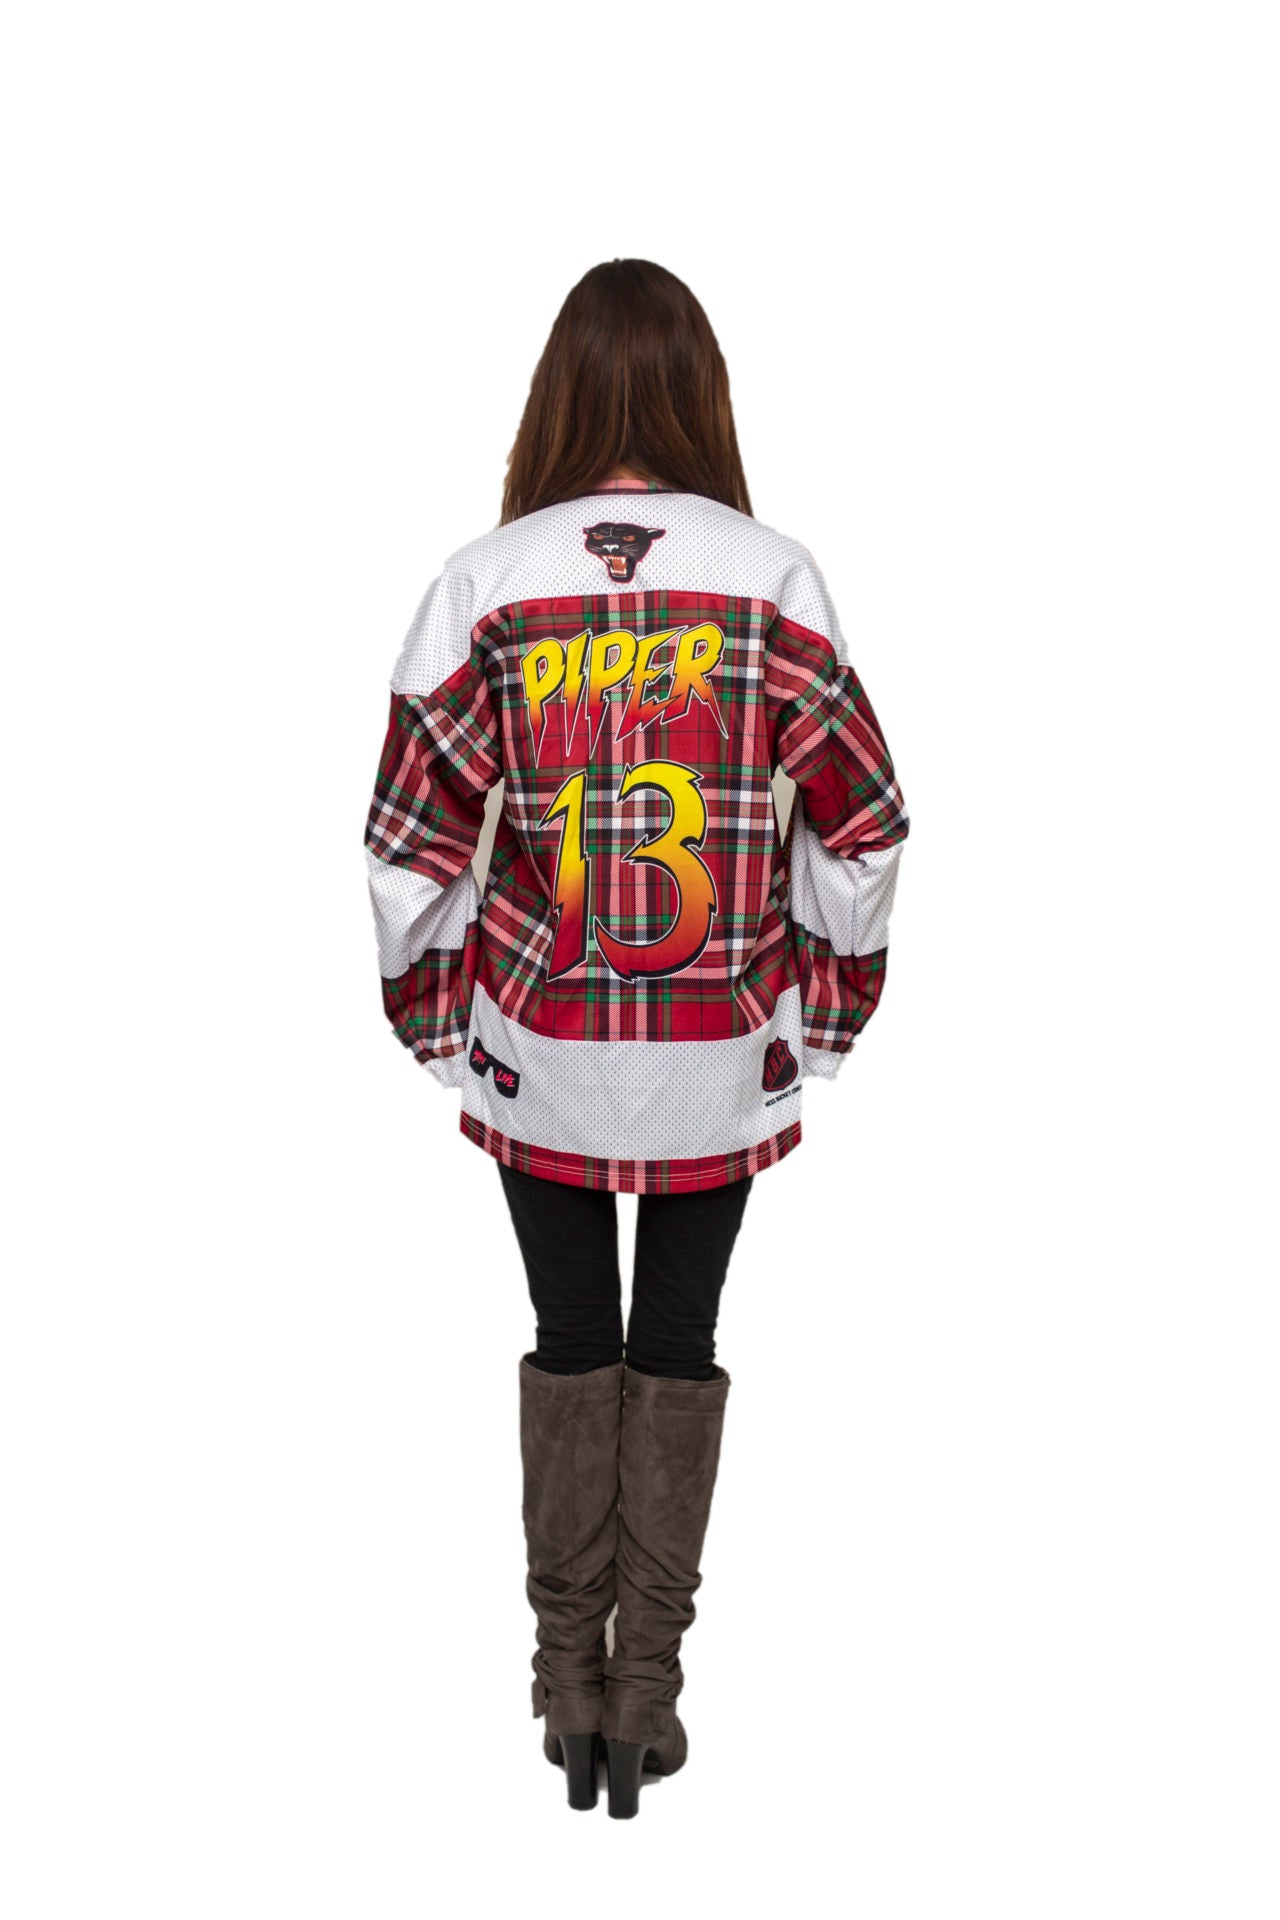 Rowdy Roddy Piper The Kilted Avengers Home Jersey - Red